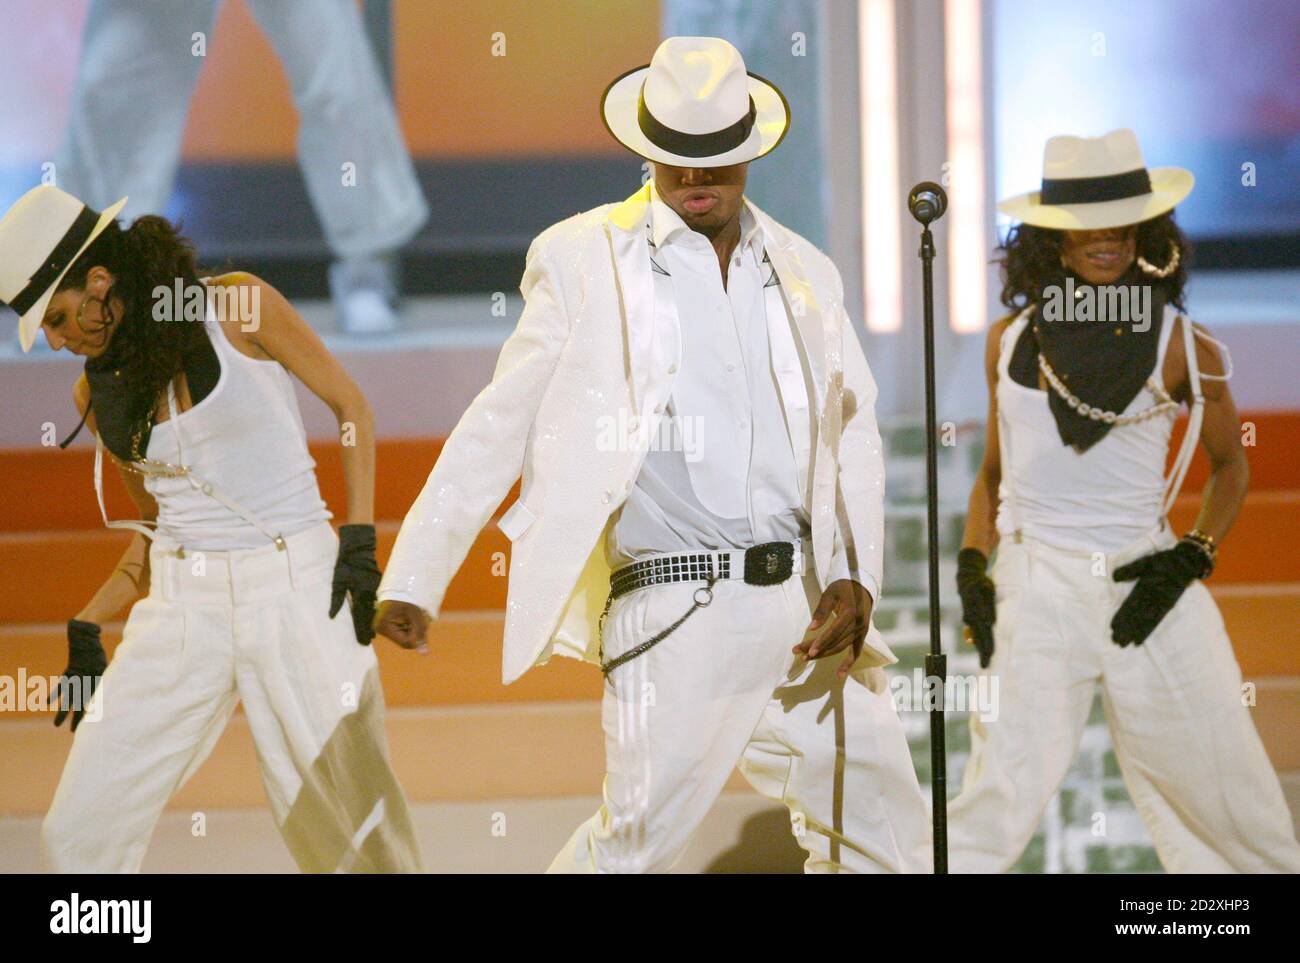 Singer Ne Yo Performs Because Of You At The 07 Bet Awards In Los Angeles California June 26 07 Reuters Mario Anzuoni United States Stock Photo Alamy